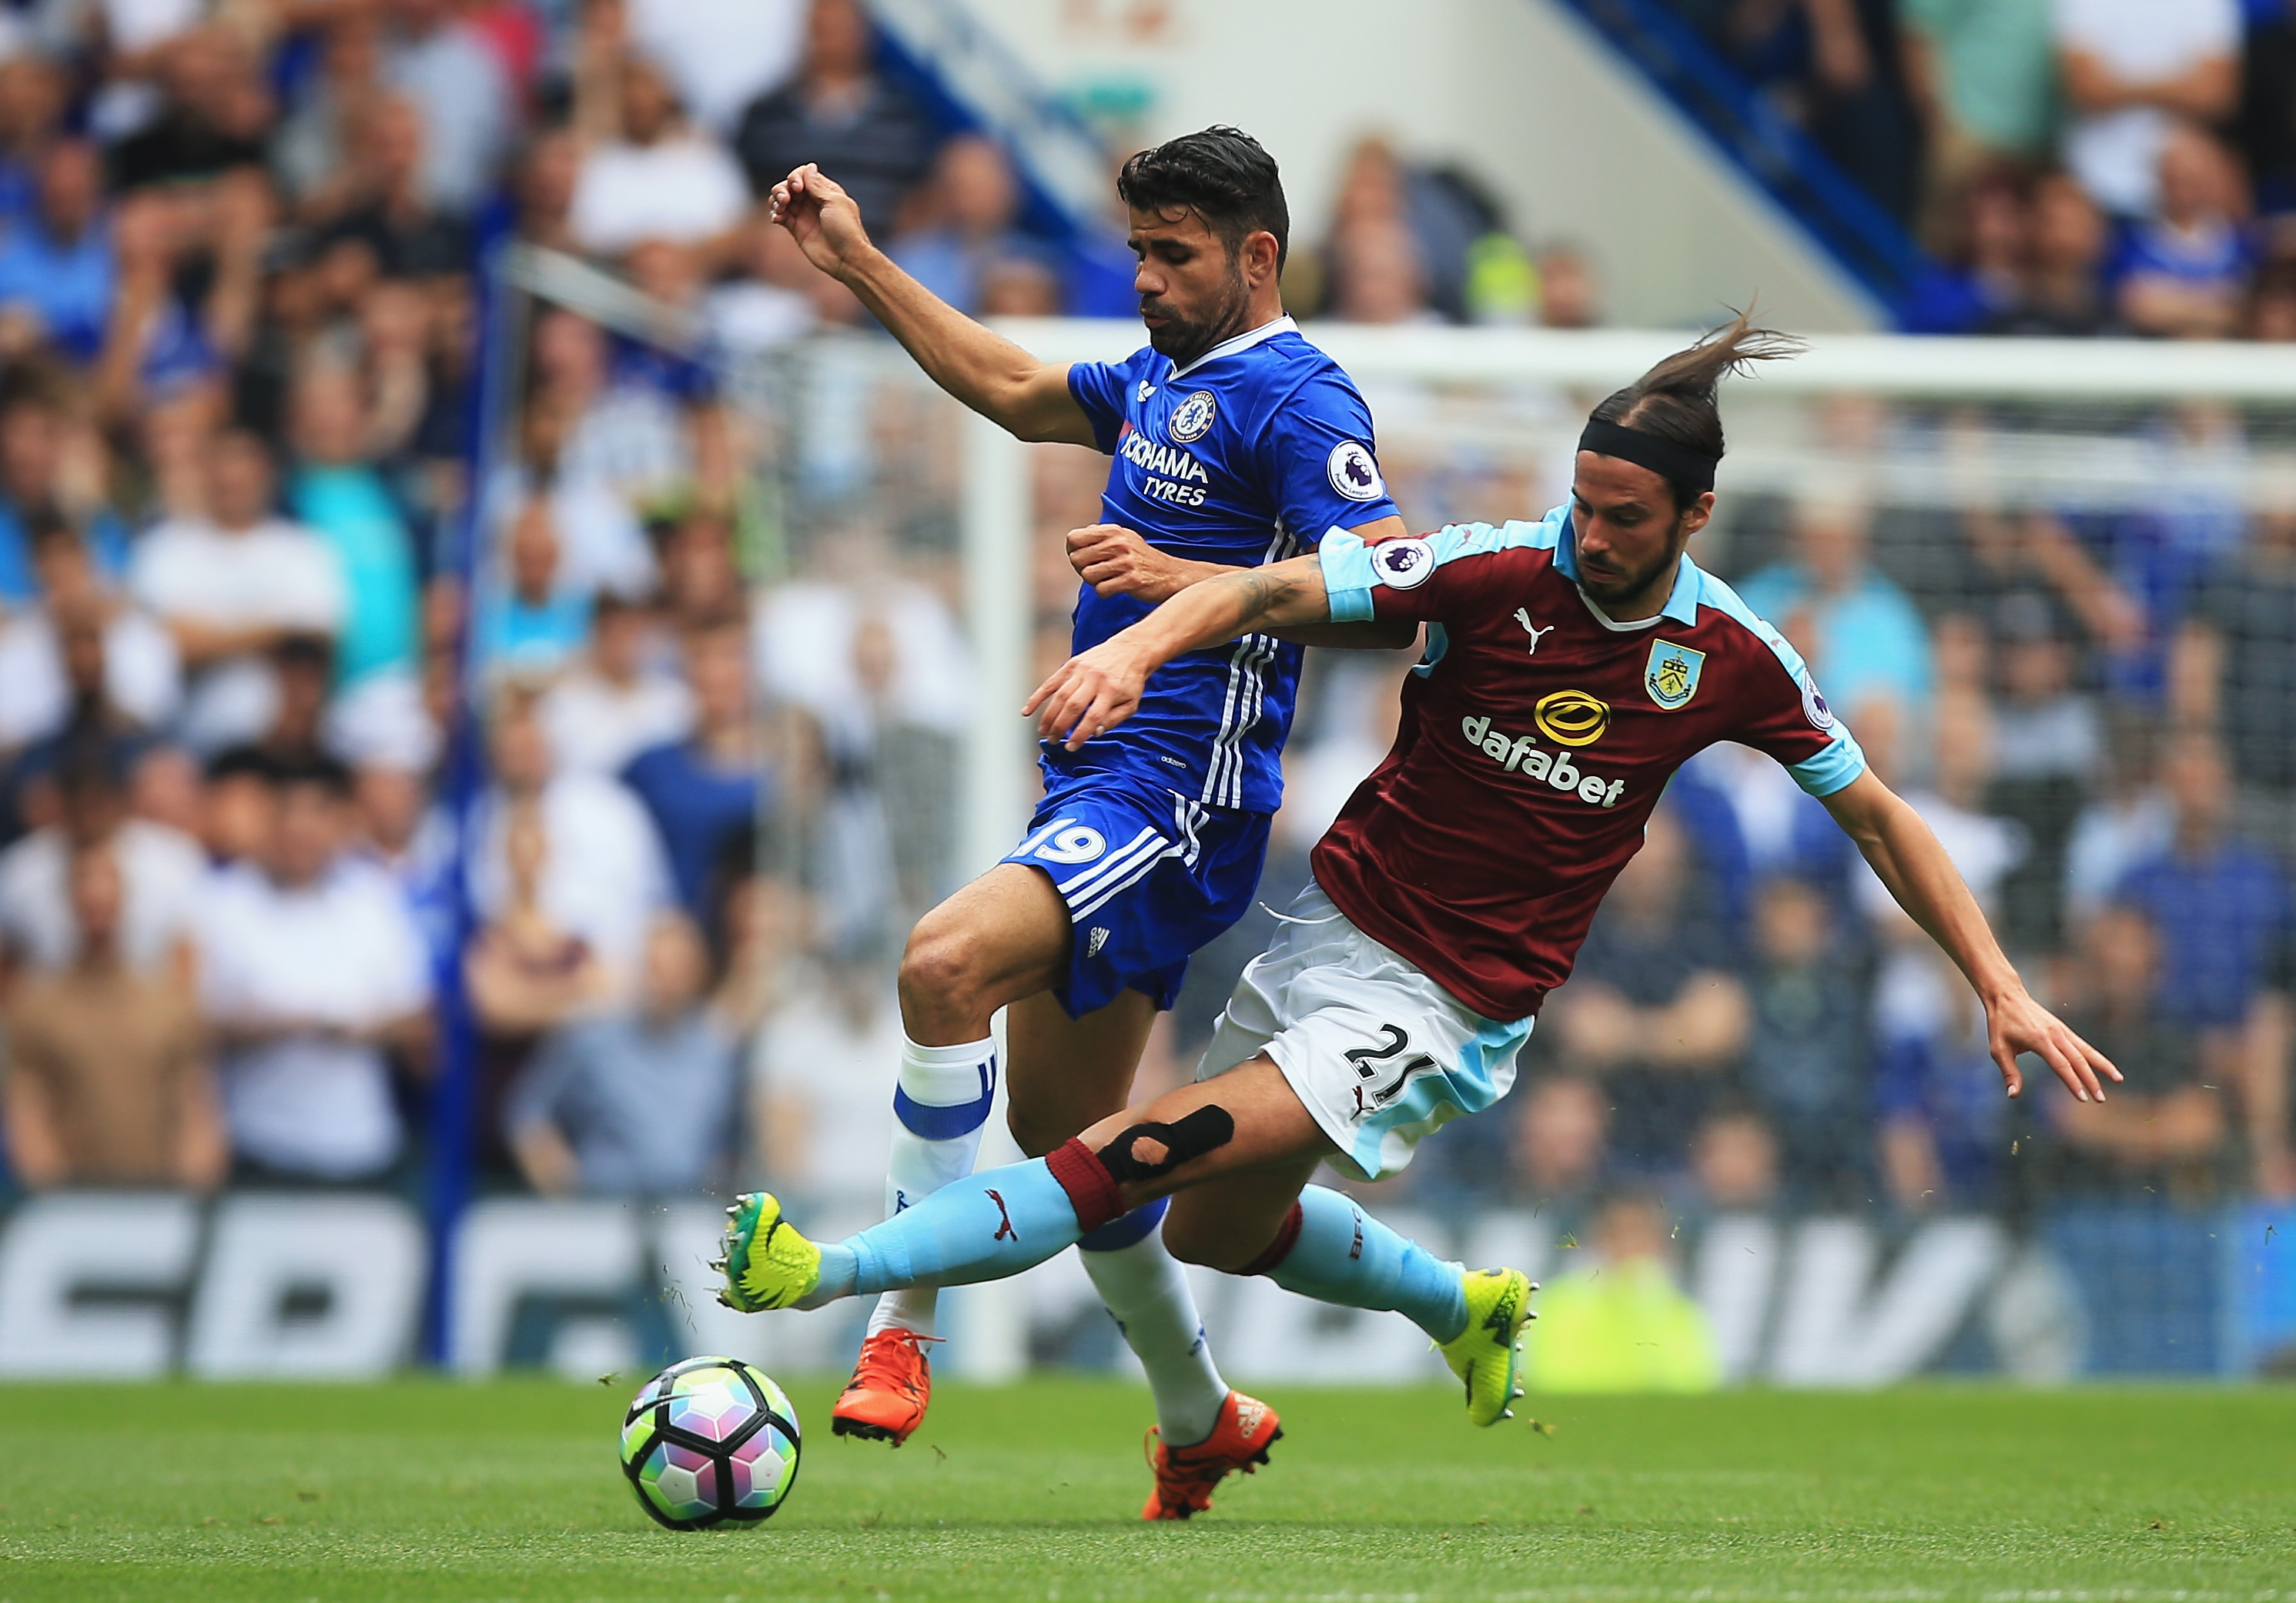 LONDON, ENGLAND - AUGUST 27: Diego Costa of Chelsea is fouled by George Boyd of Burnley during the Premier League match between Chelsea and Burnley at Stamford Bridge on August 27, 2016 in London, England.  (Photo by Ben Hoskins/Getty Images)